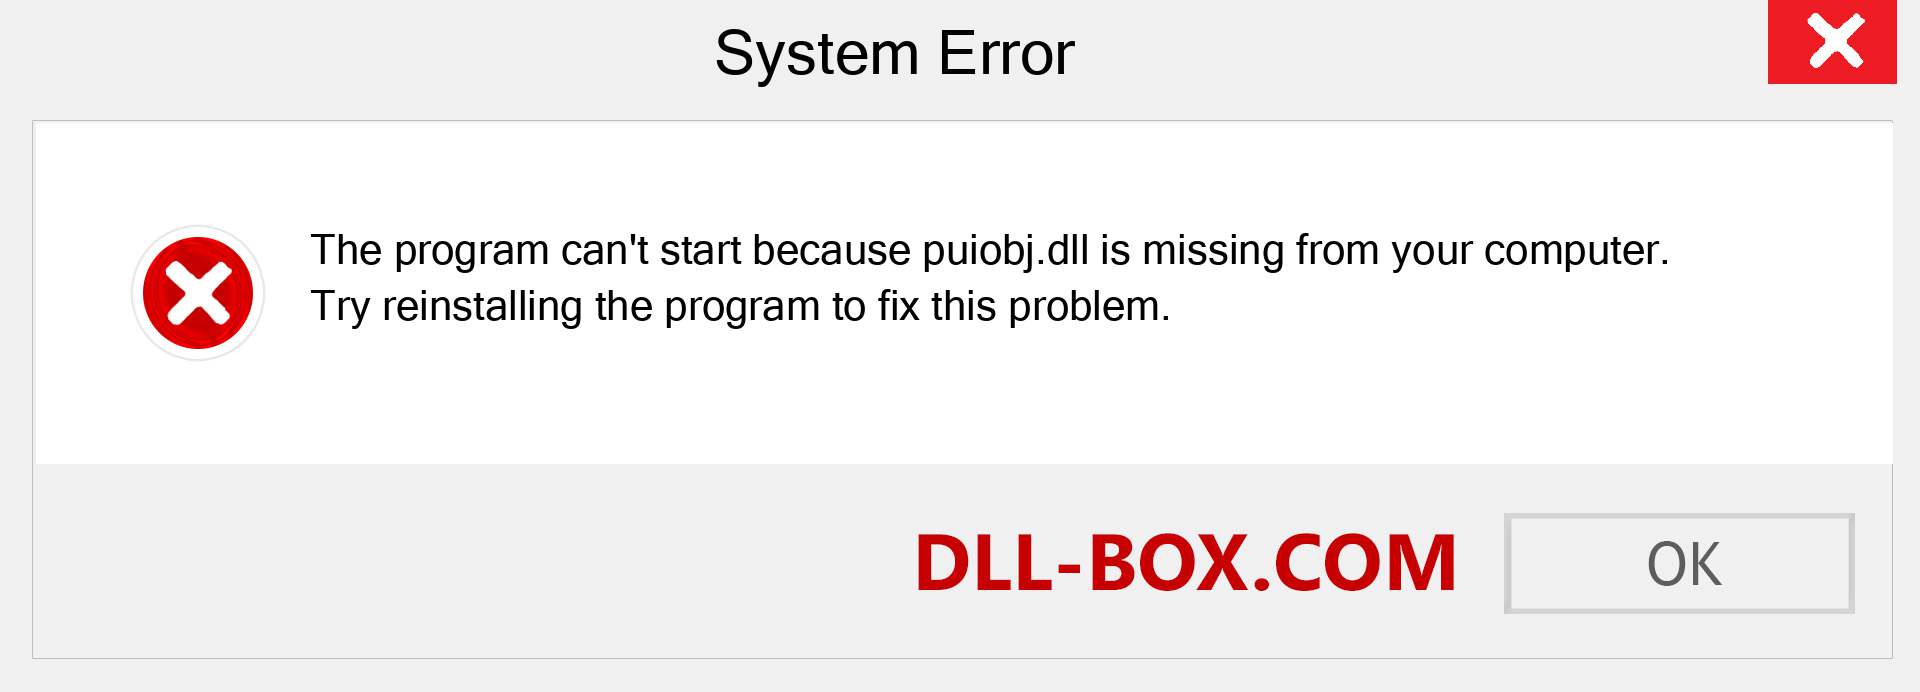  puiobj.dll file is missing?. Download for Windows 7, 8, 10 - Fix  puiobj dll Missing Error on Windows, photos, images